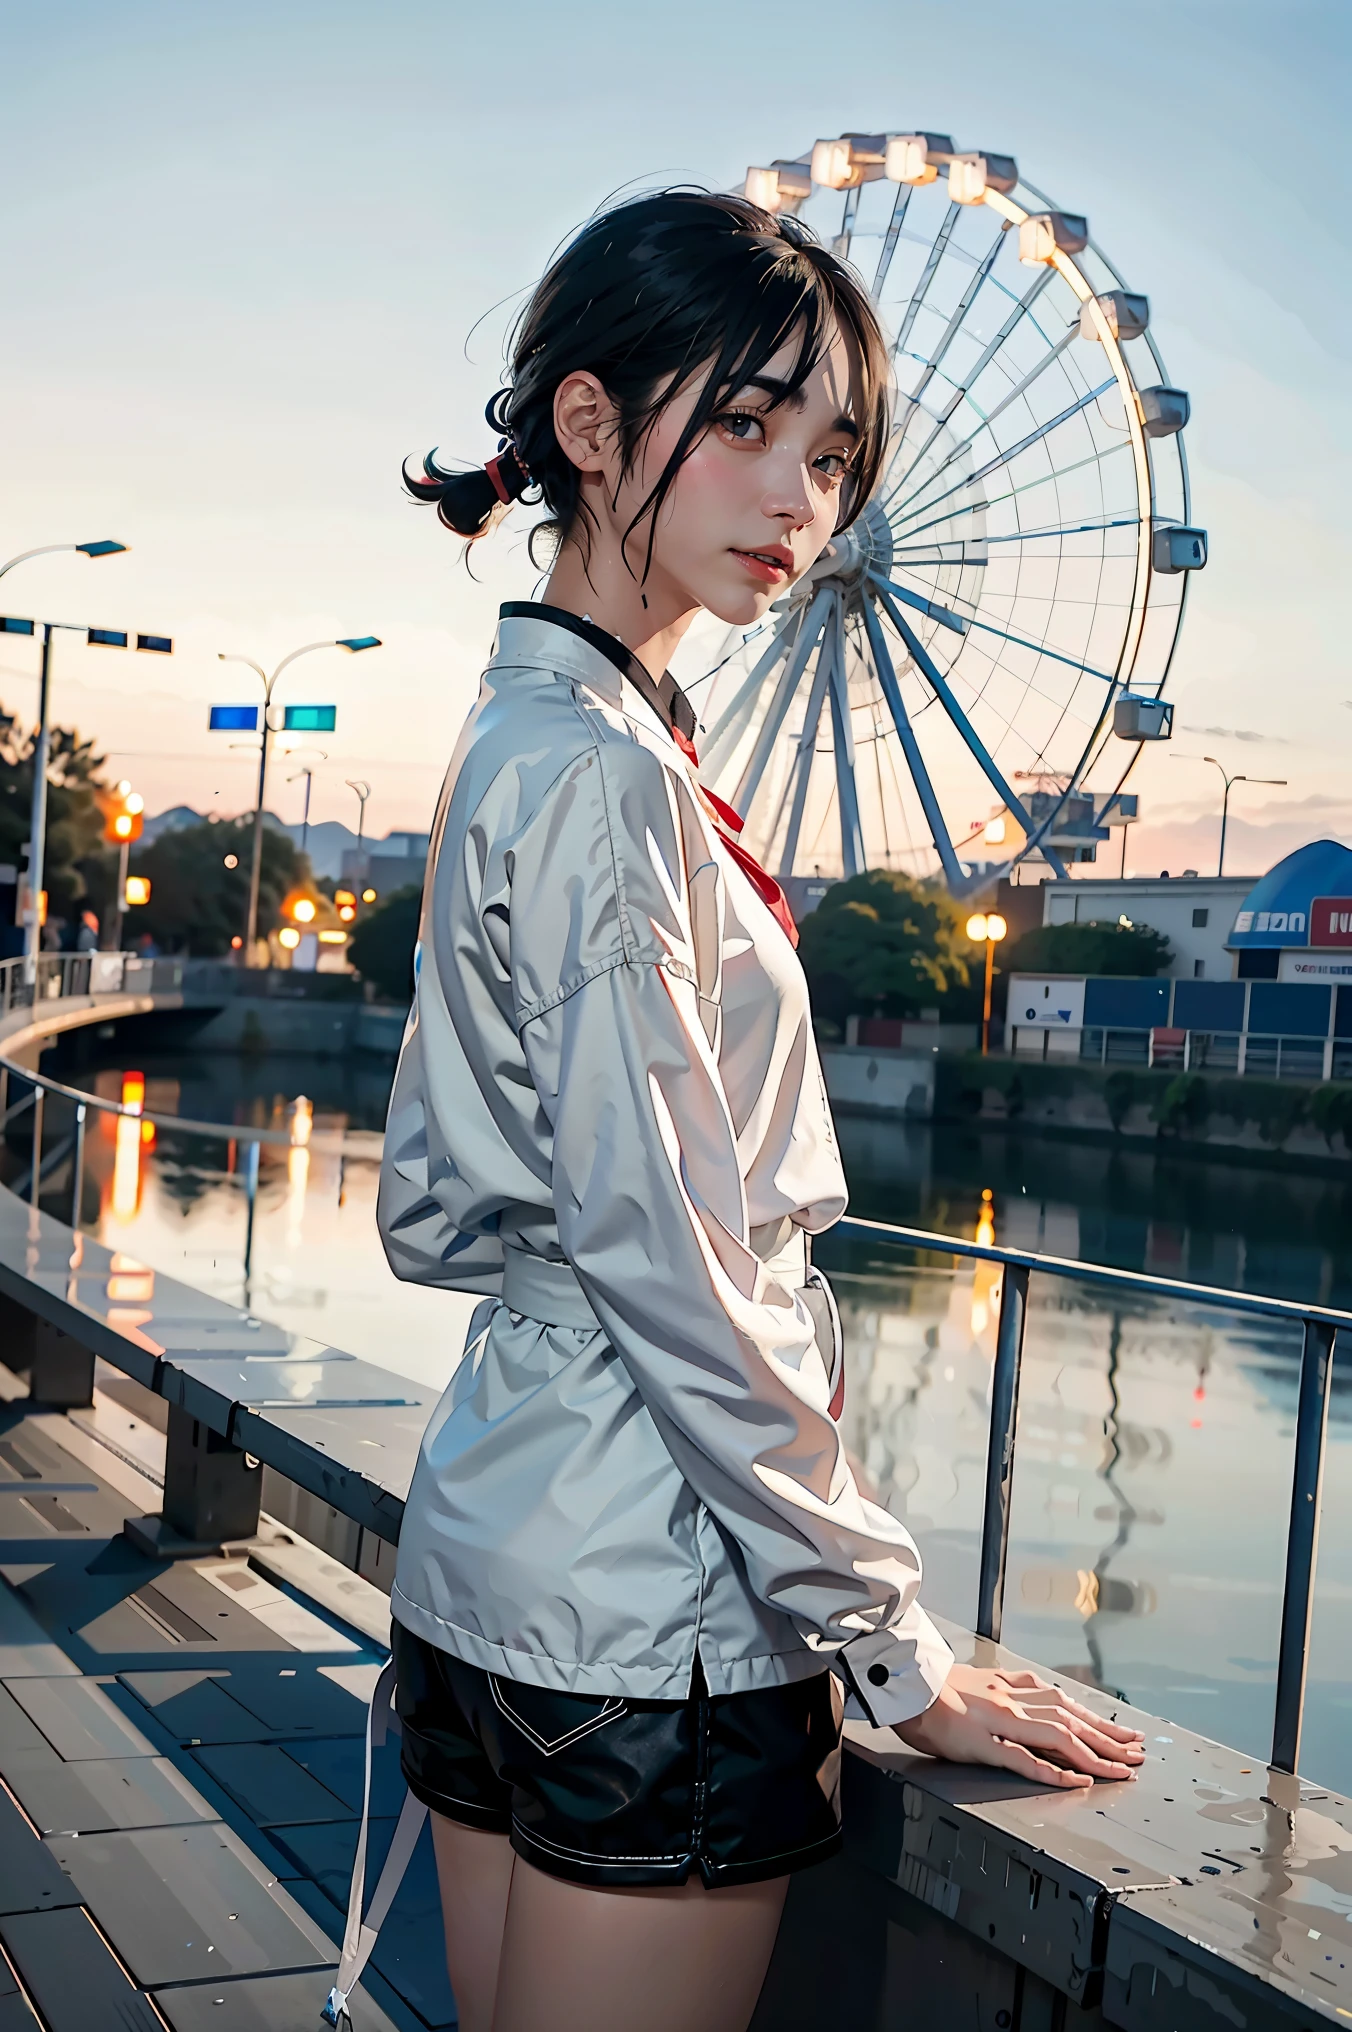 arafed woman standing on a ledge with a ferris wheel in the background, hyung tae, jinyoung shin, album art, cai xukun, profile picture 1024px, kim doyoung, hong june hyung, yanjun chengt, bladee from drain gang, male ulzzang, xintong chen, taken with canon eos 5 d mark iv